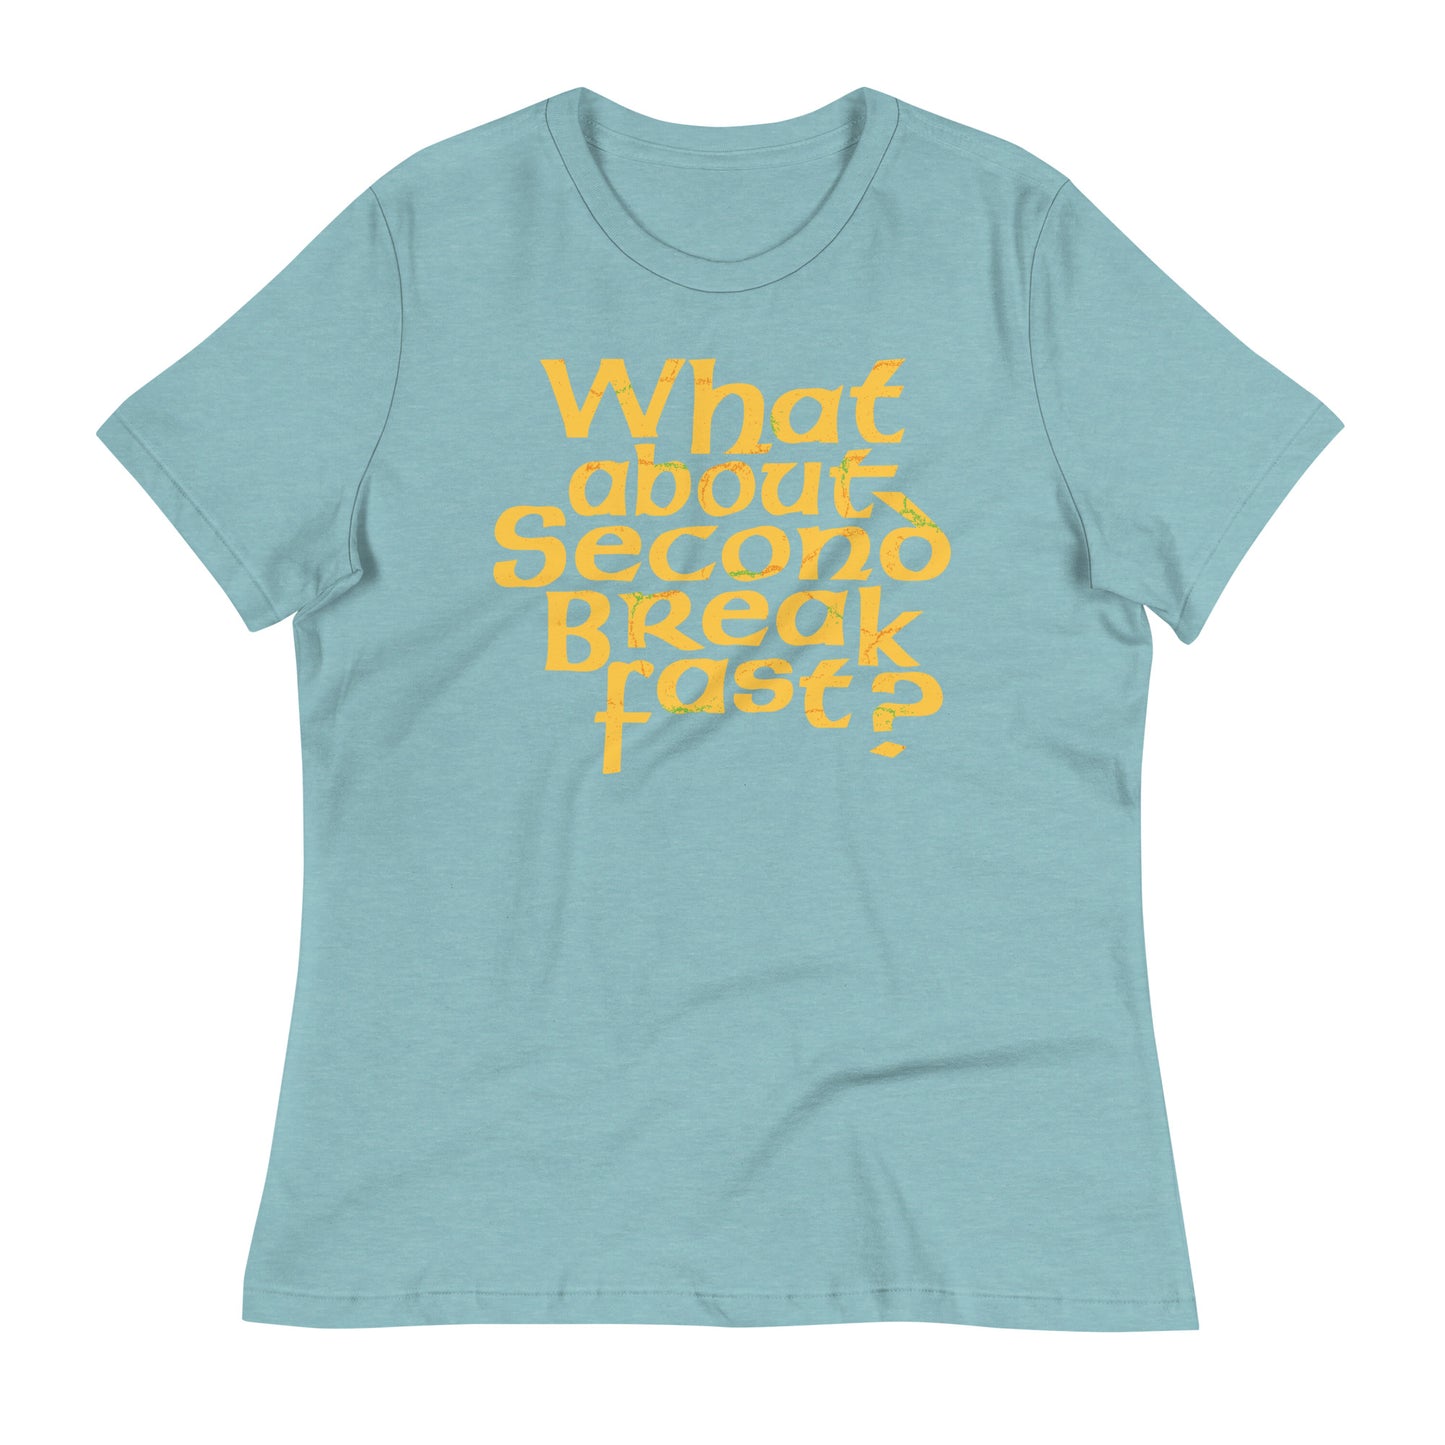 What About Second Breakfast? Women's Signature Tee